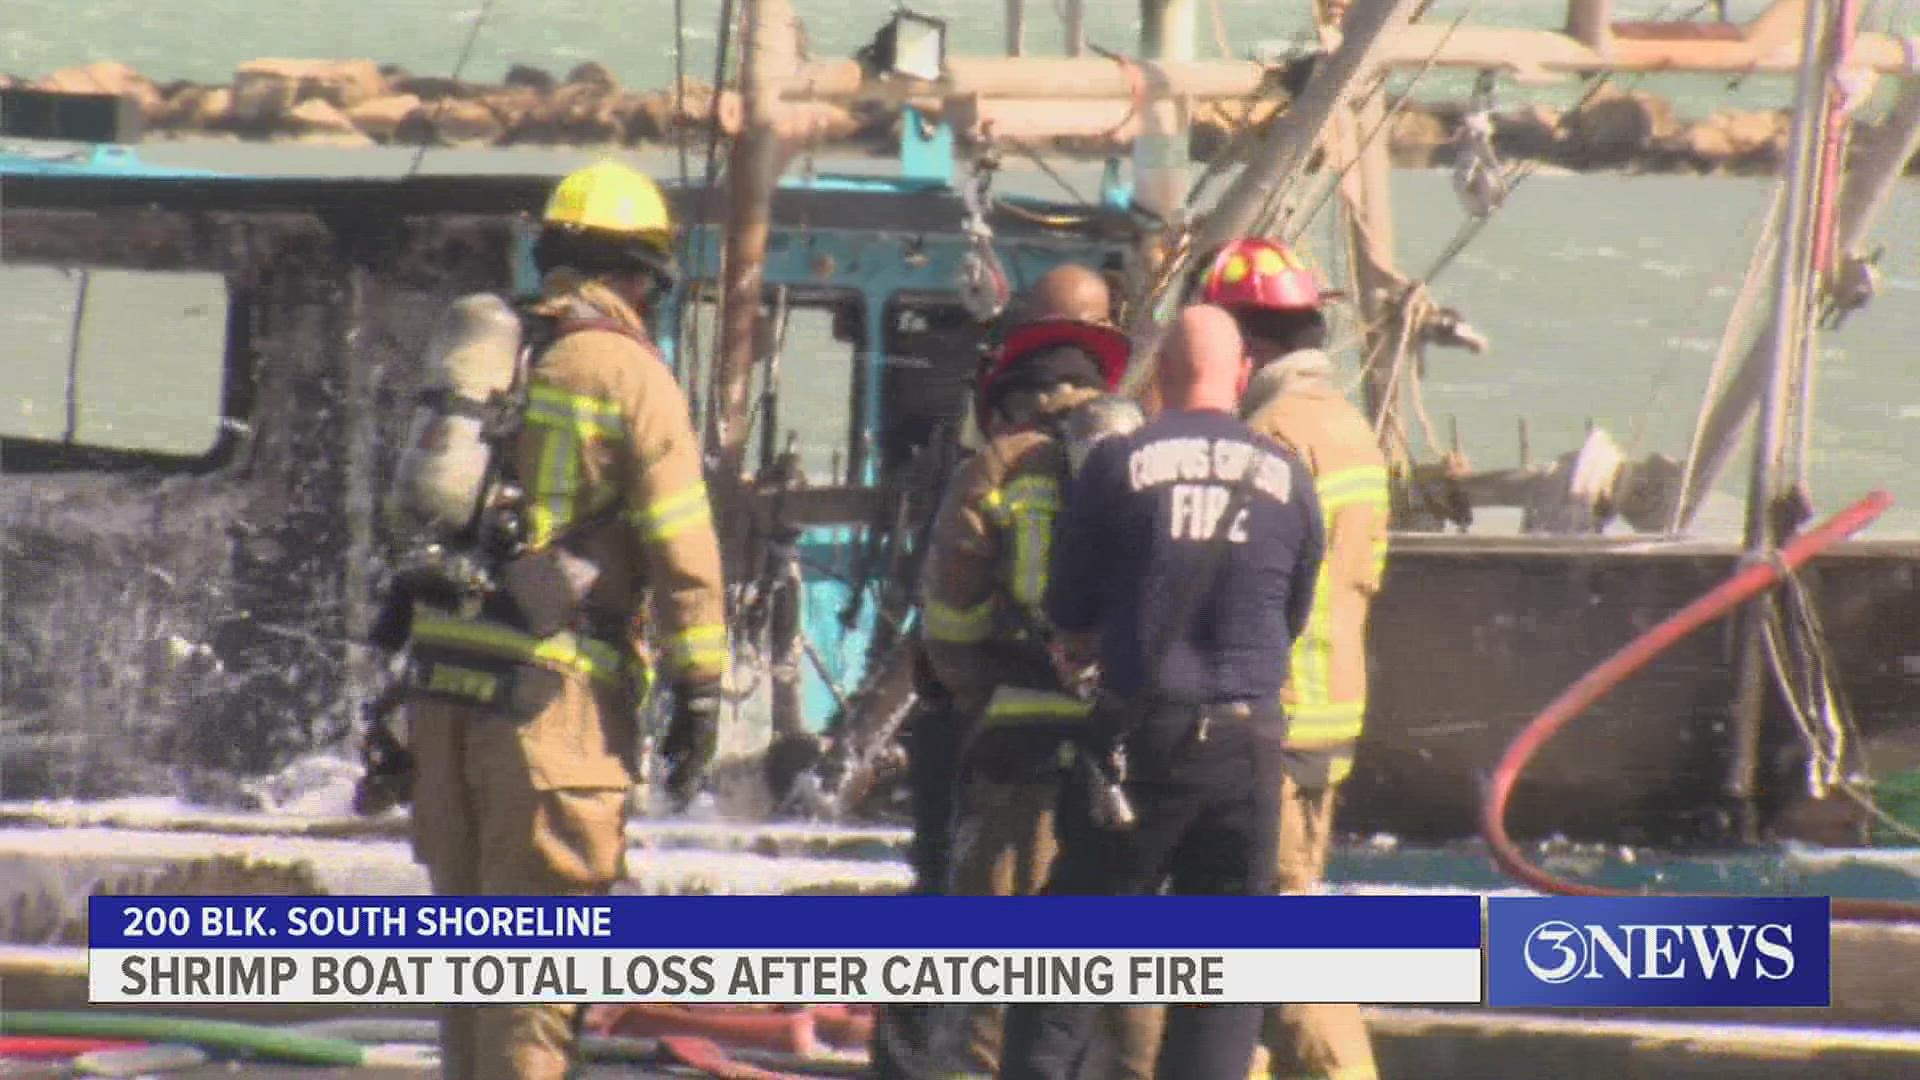 A shrimp boat spilled diesel fuel into the water after a fire onboard, officials said.